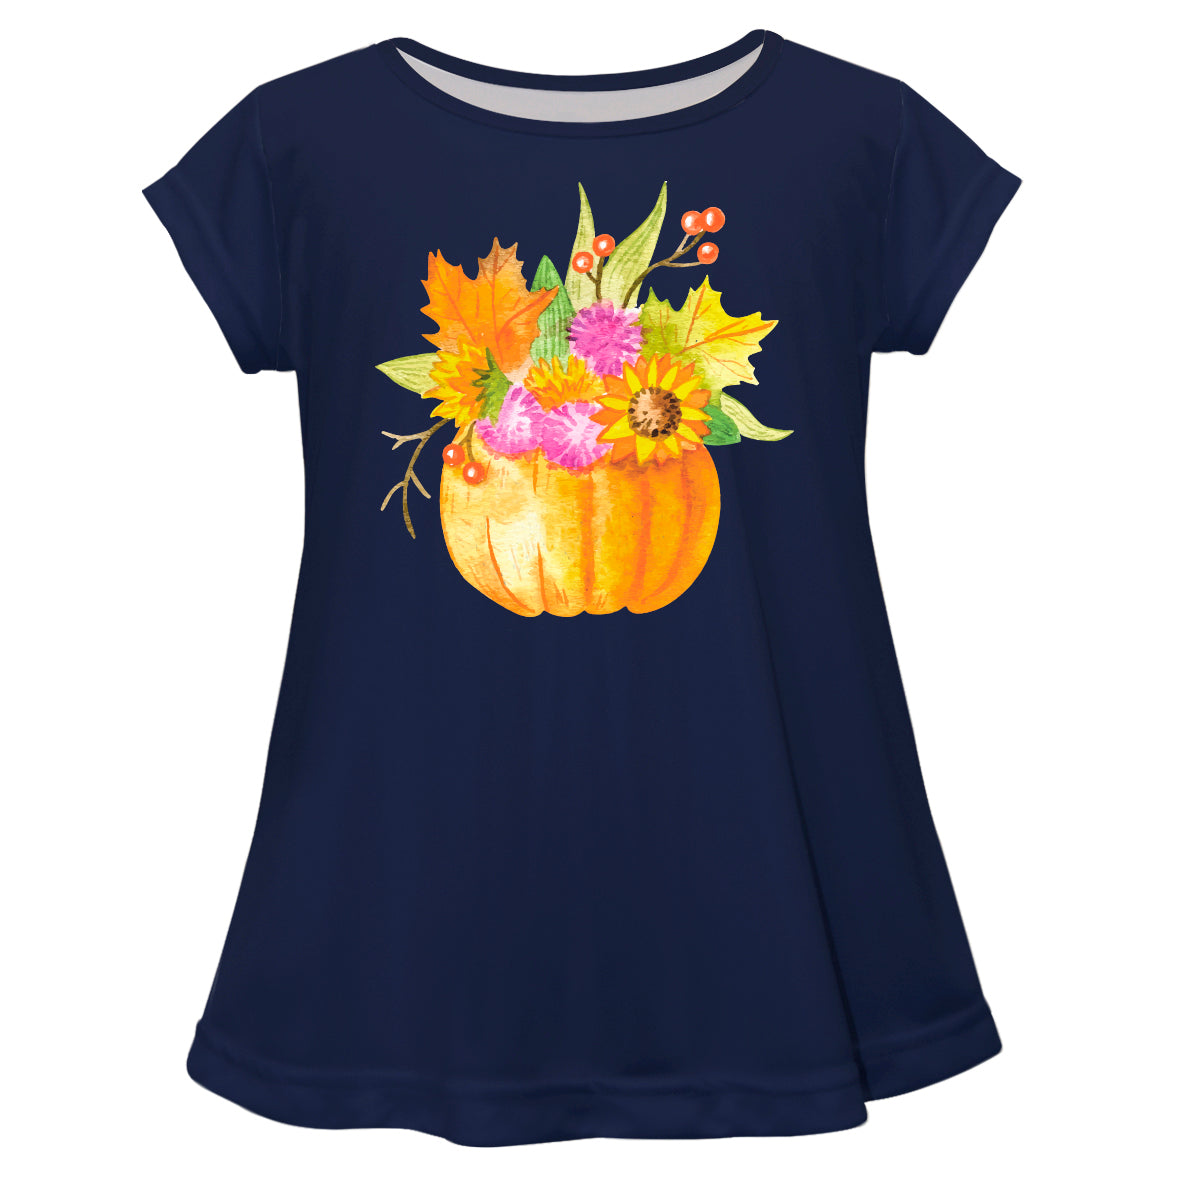 Girls pink pumpkins blouse with name - Wimziy&Co.